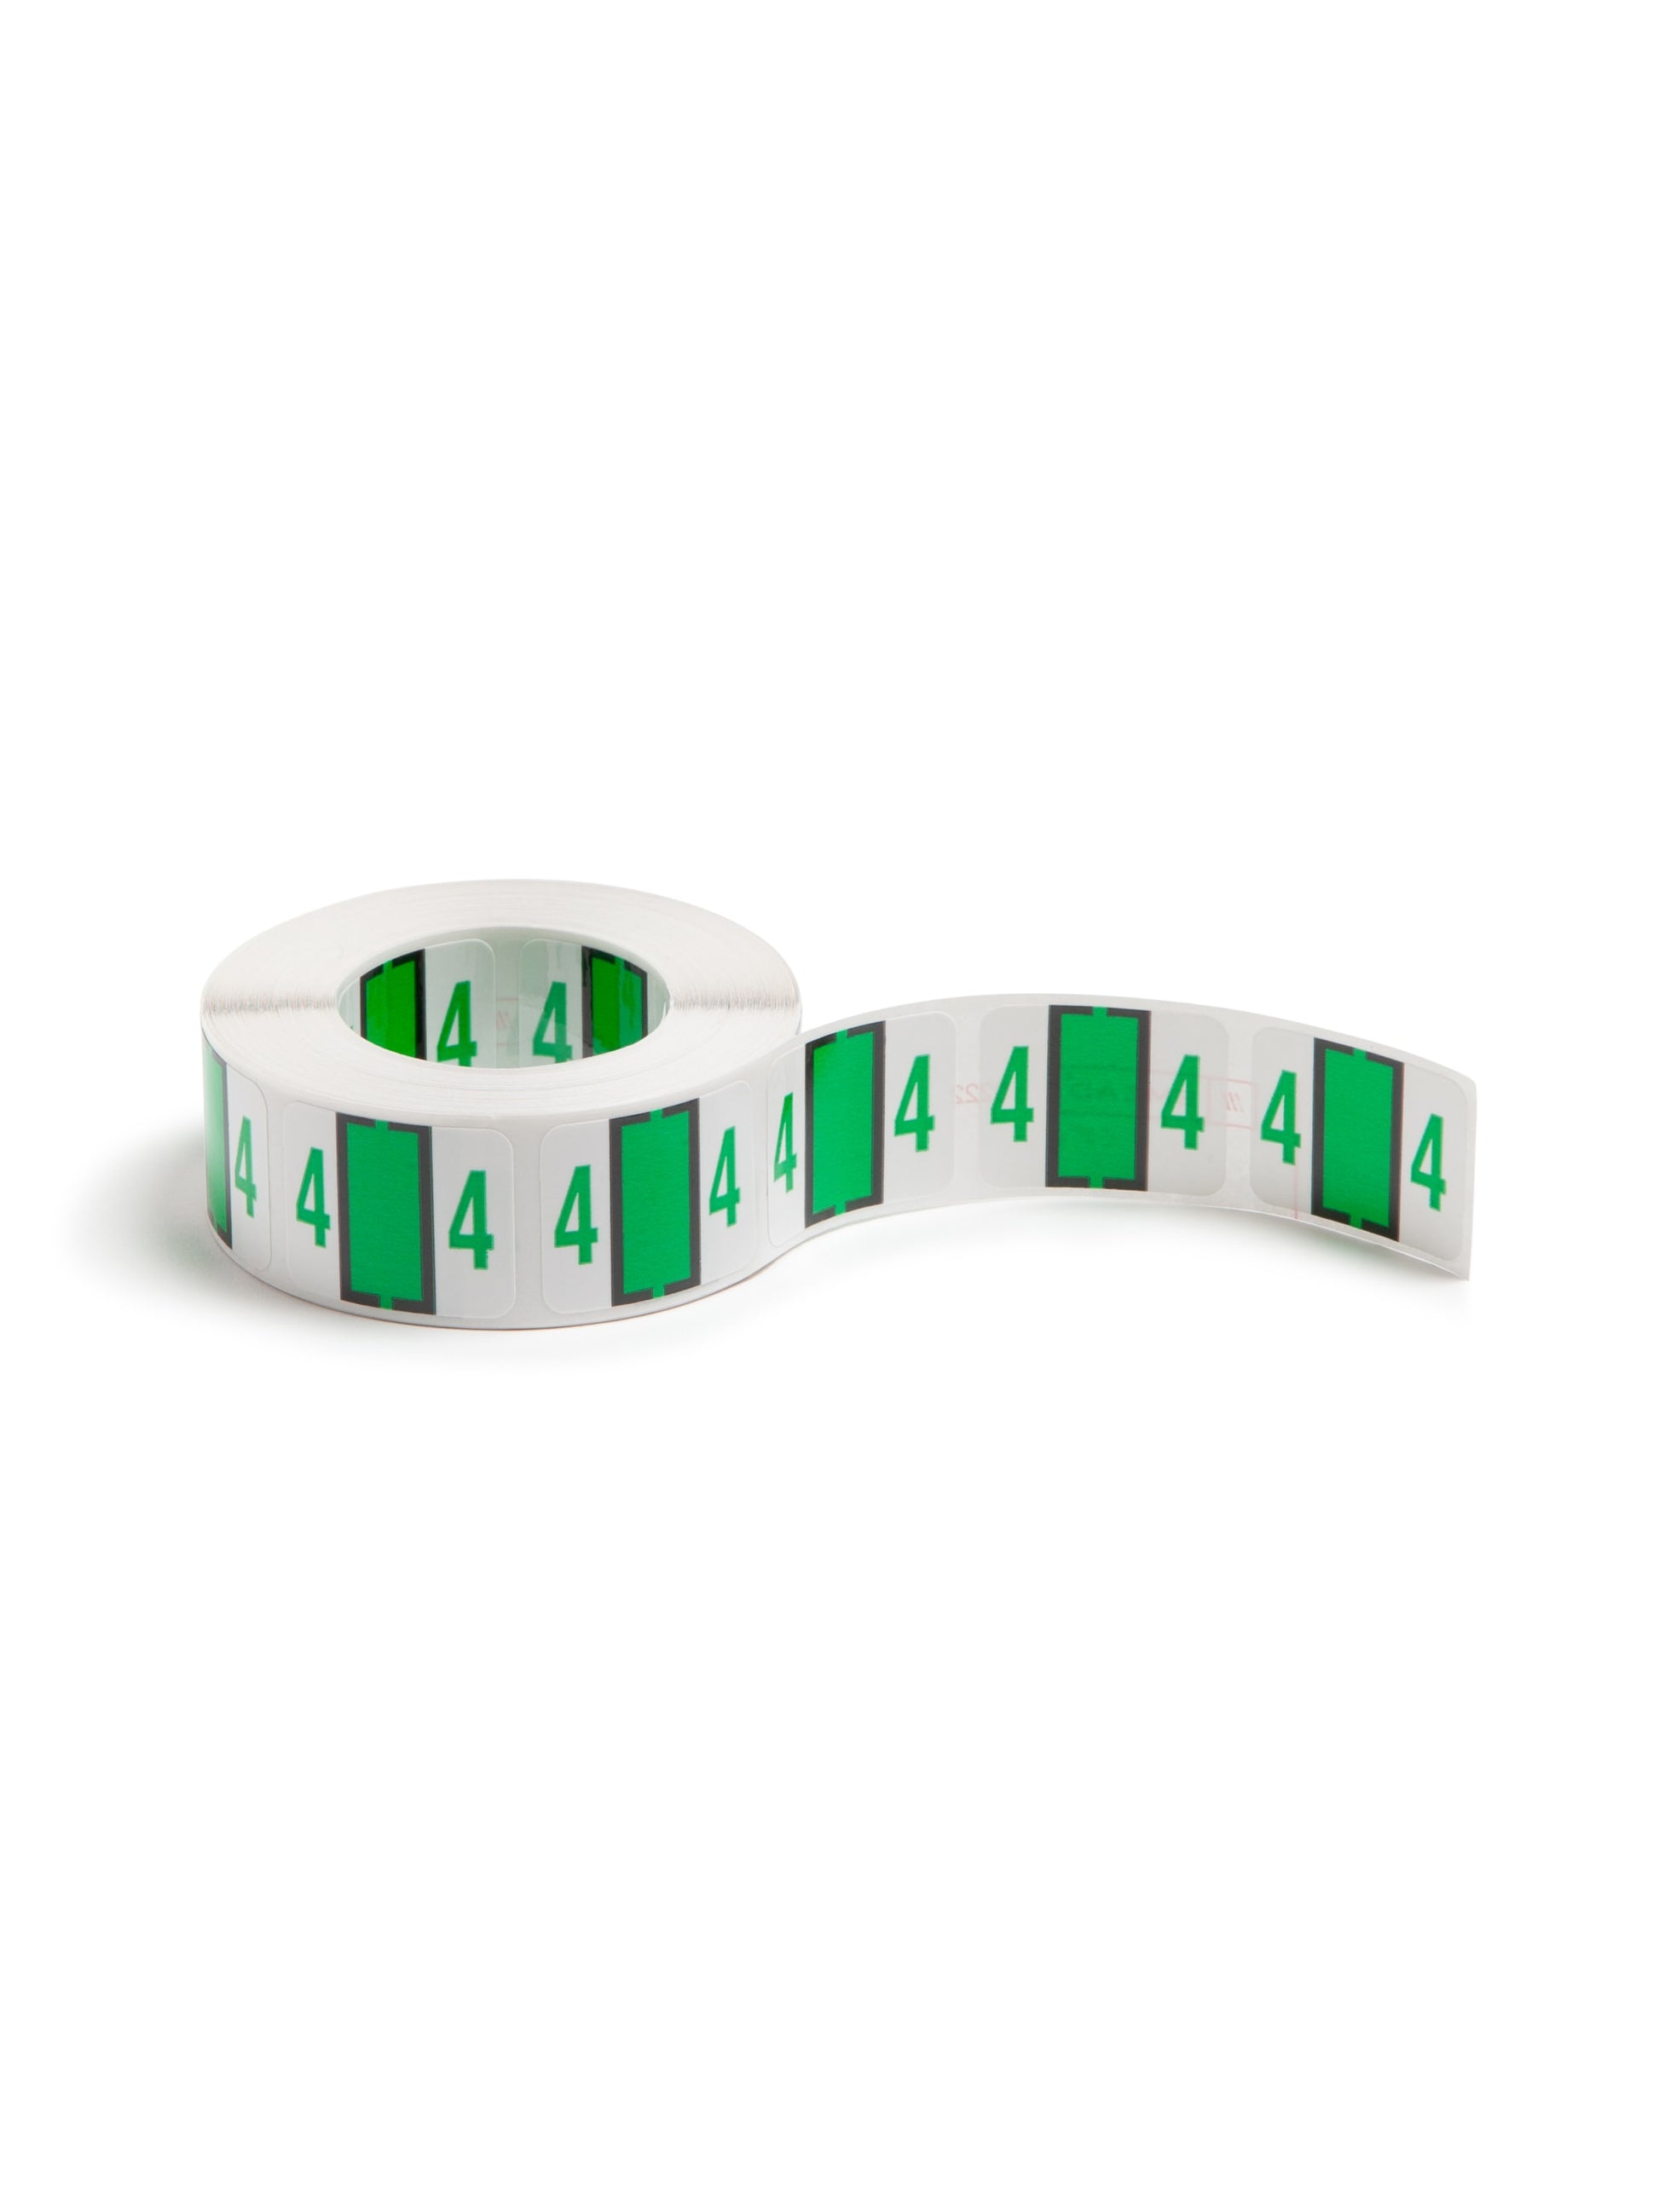 BCCRN Bar Style Color-Coded Numeric Labels, 0-9 Rolls, 4 - Light Green Color, 1-1/4 X 1 Size, Set of 1, 086486673747